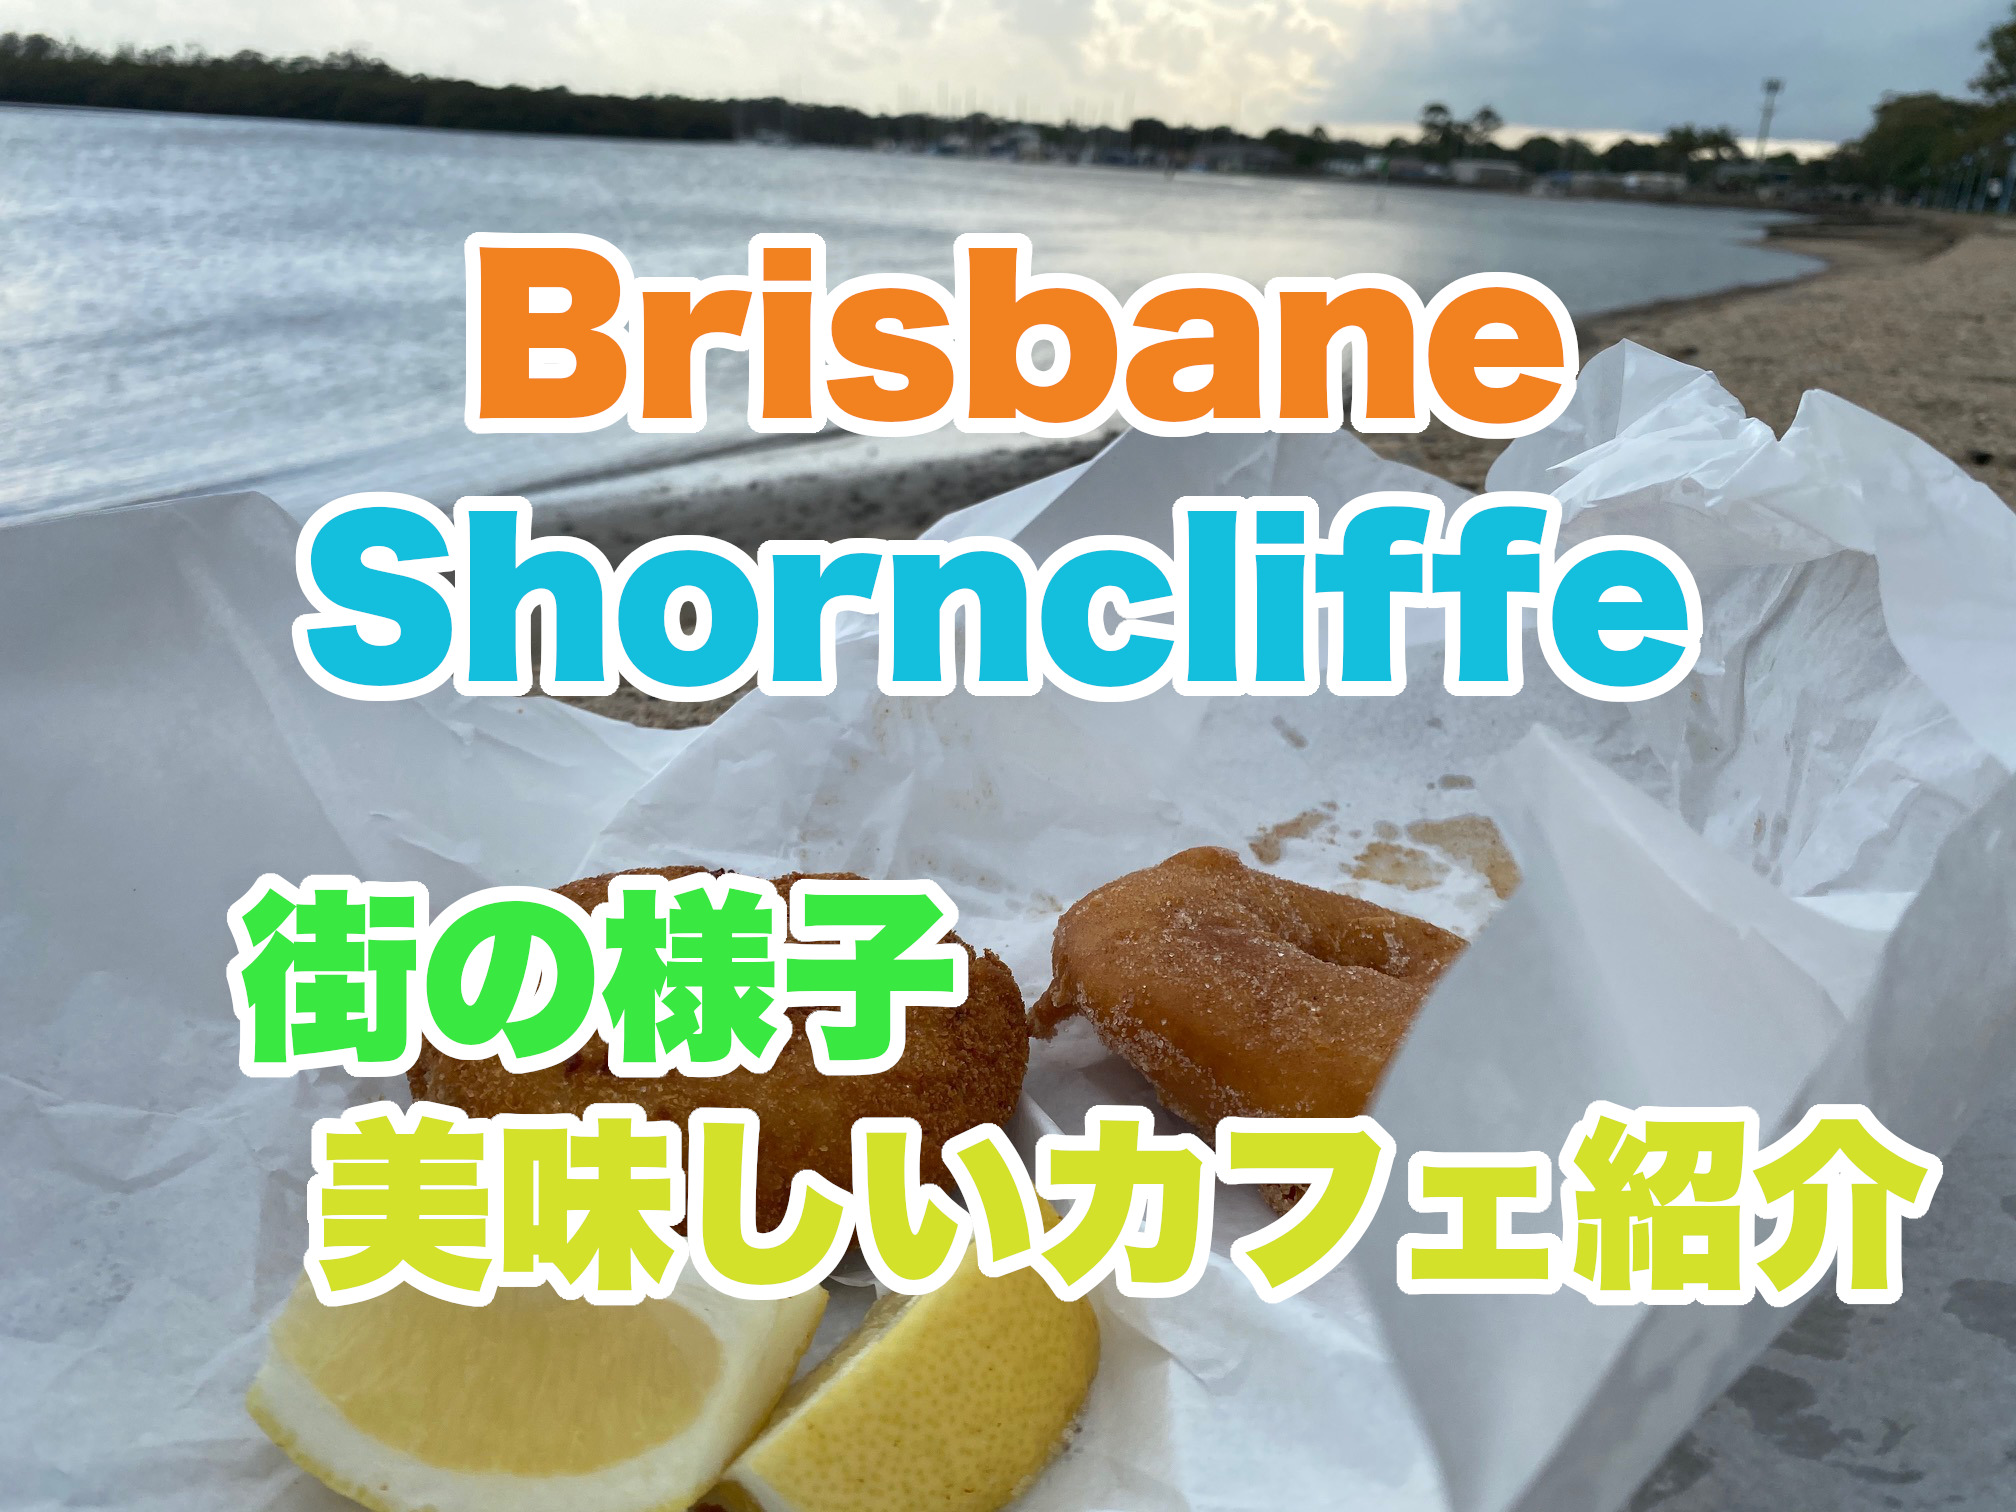 Shorncliffeの様子と美味しいカフェ紹介